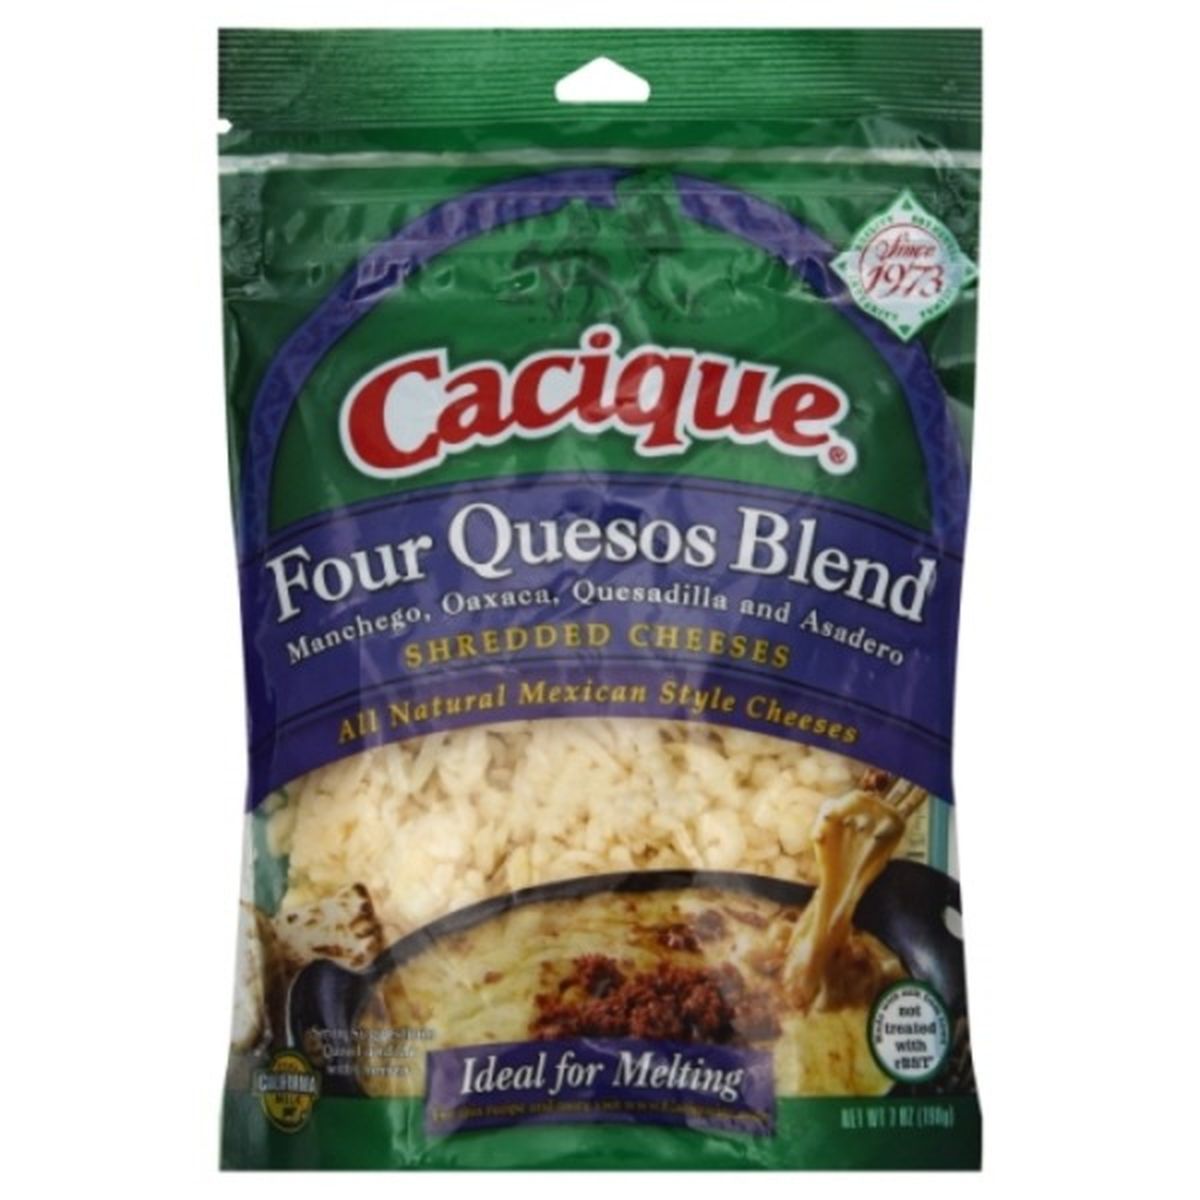 Calories in Cacique Cheese, Shredded, Four Quesos Blend